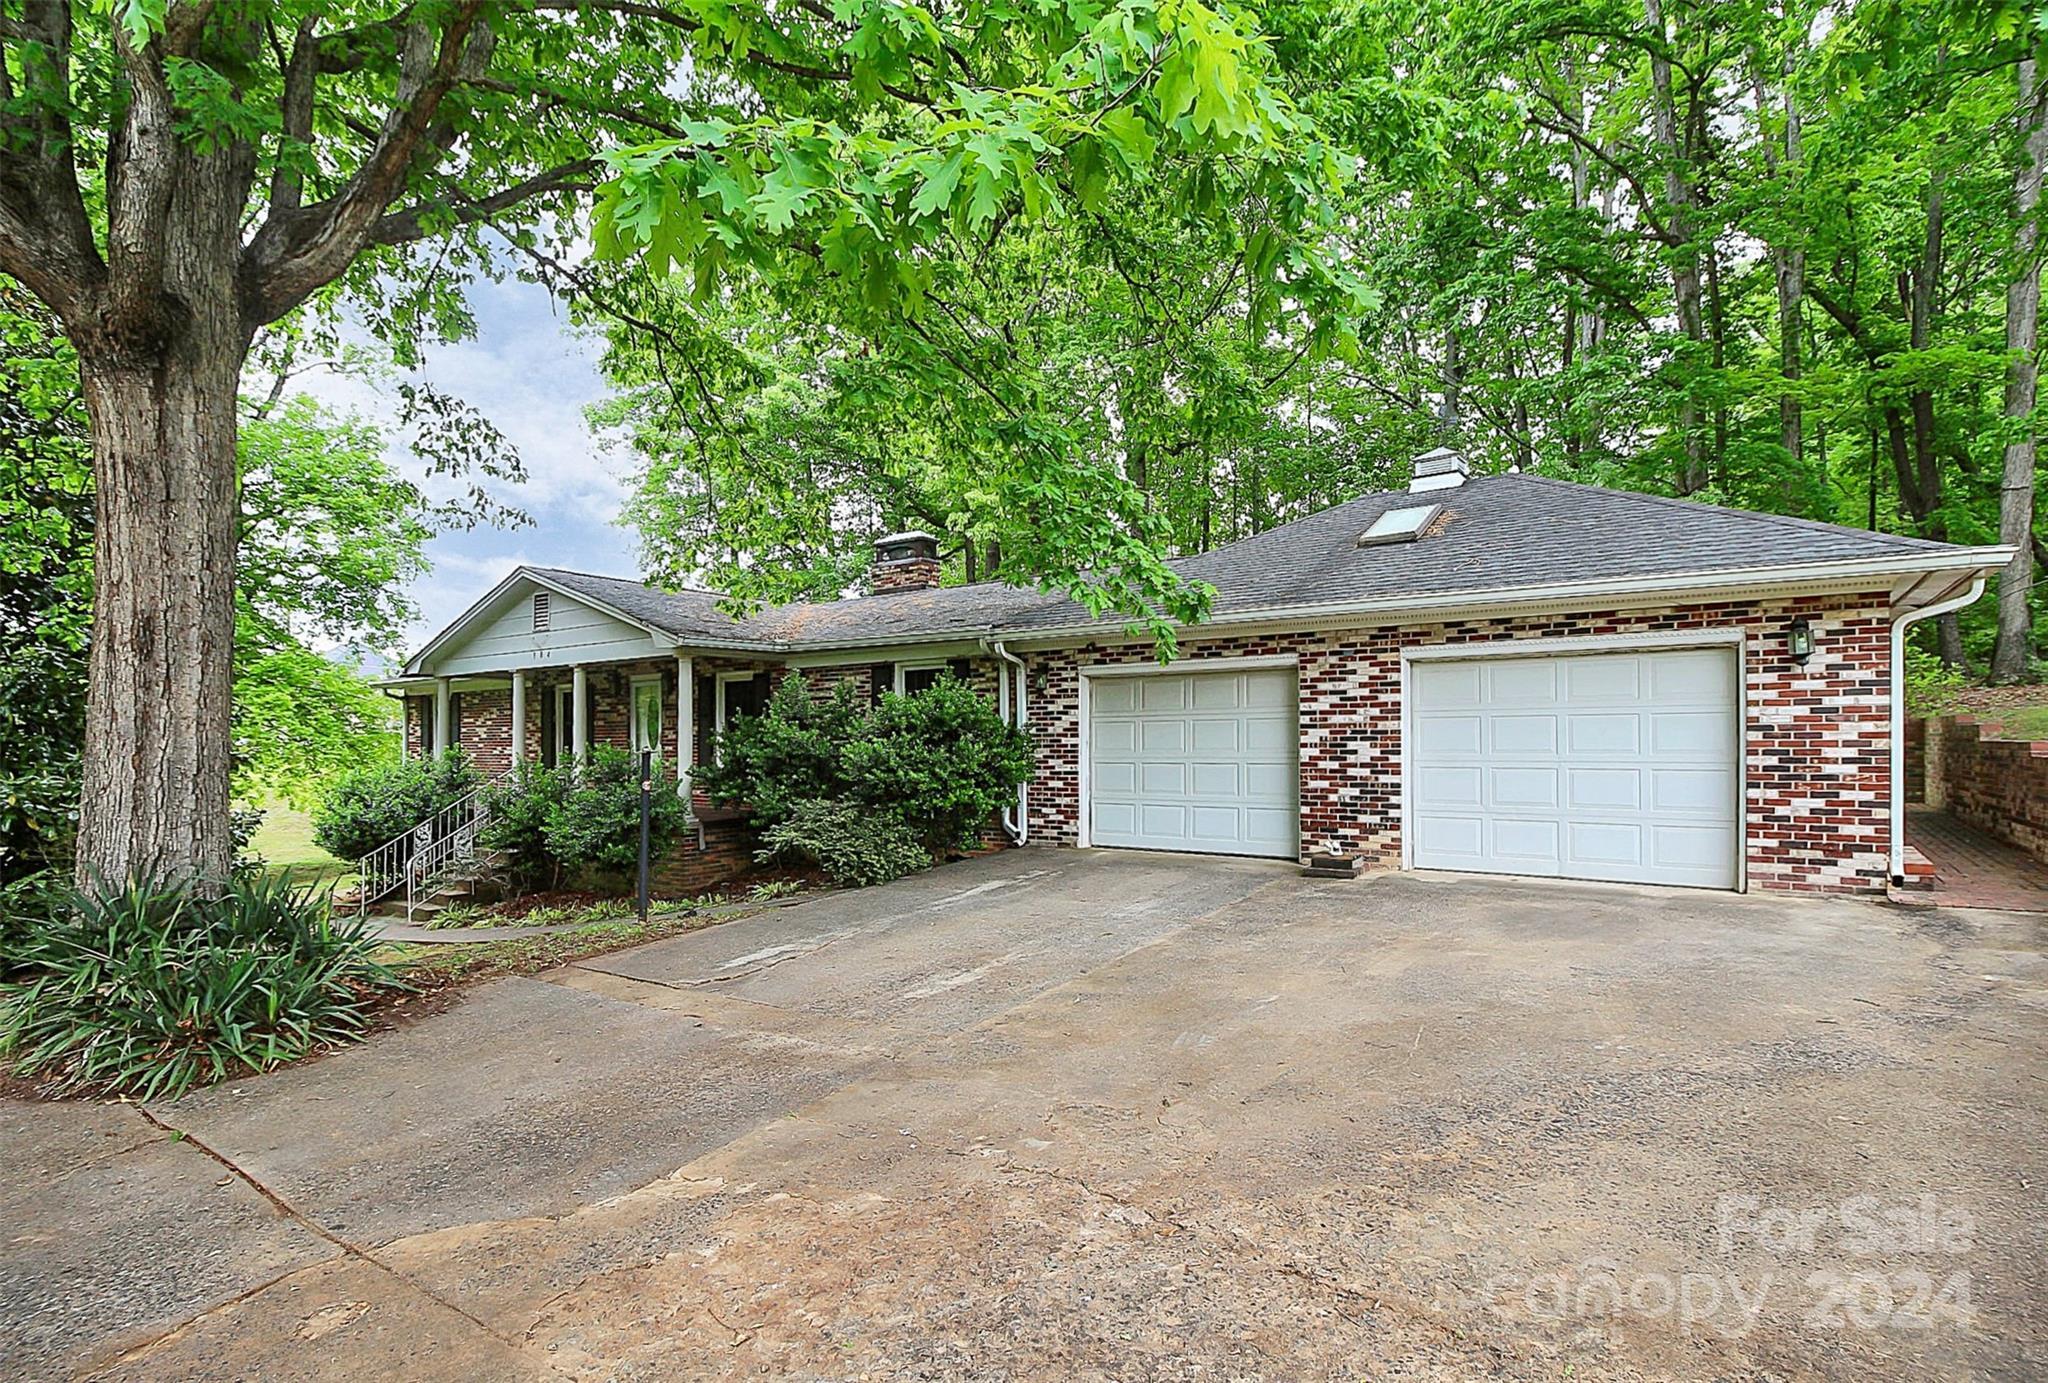 Photo one of 904 N 6Th St Bessemer City NC 28016 | MLS 4129245